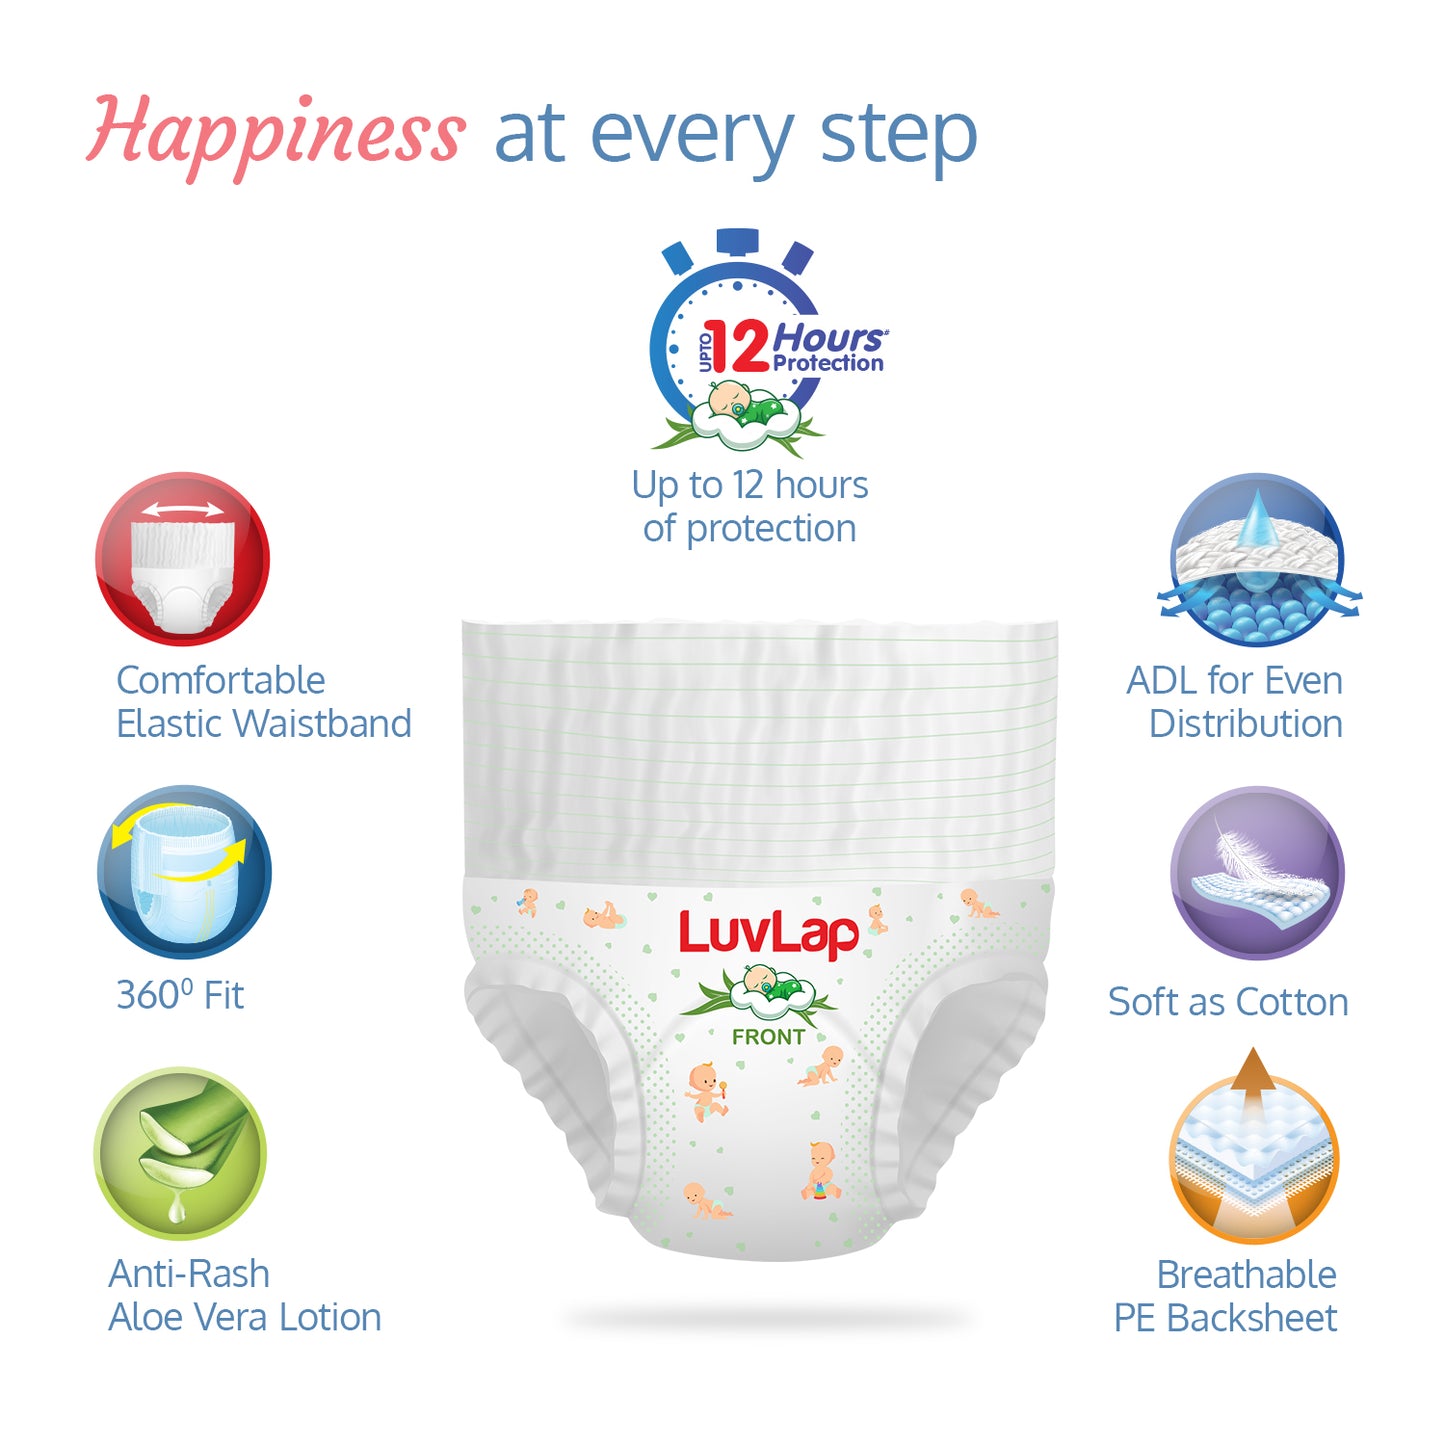 Diaper Pants, XL, 54 Count, with upto 12 Hour protection